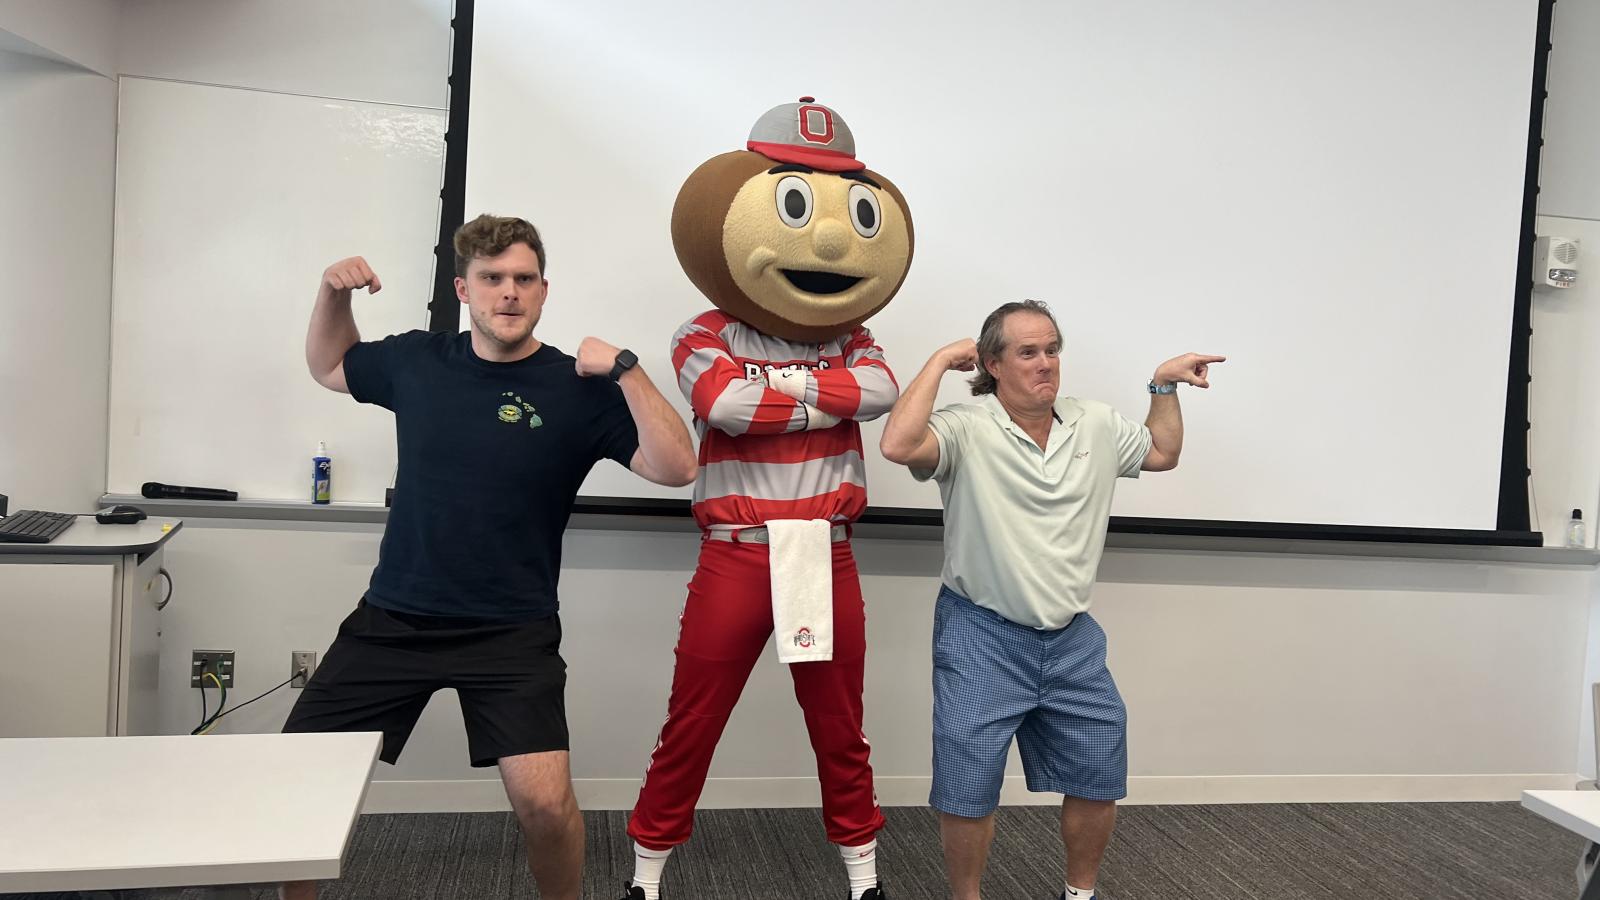 Dr. Sullivan, Brutus and student at exam photo op